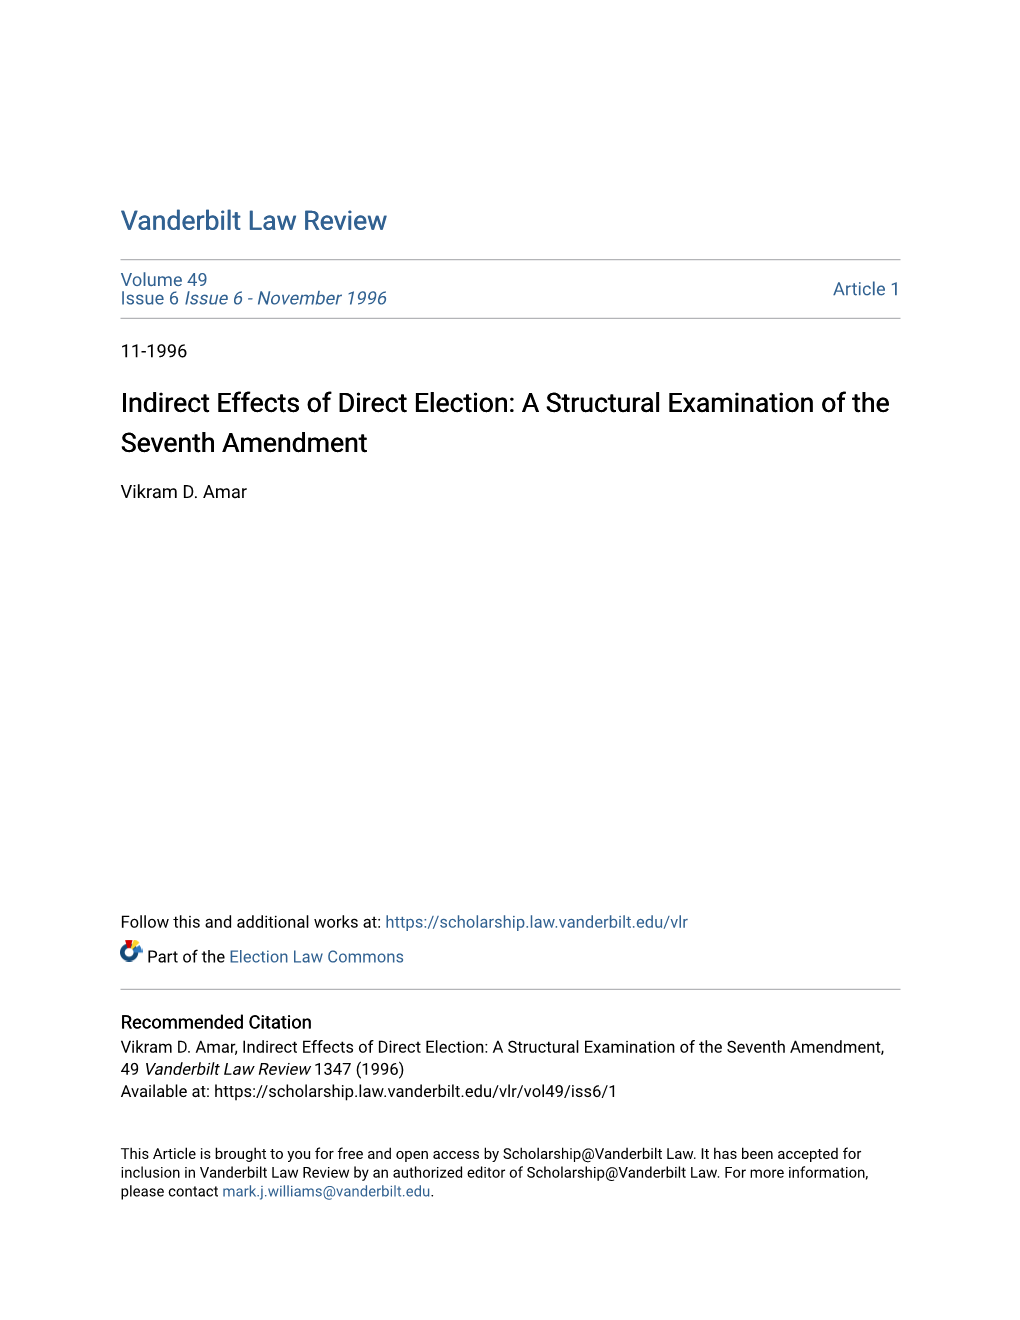 Indirect Effects of Direct Election: a Structural Examination of the Seventh Amendment